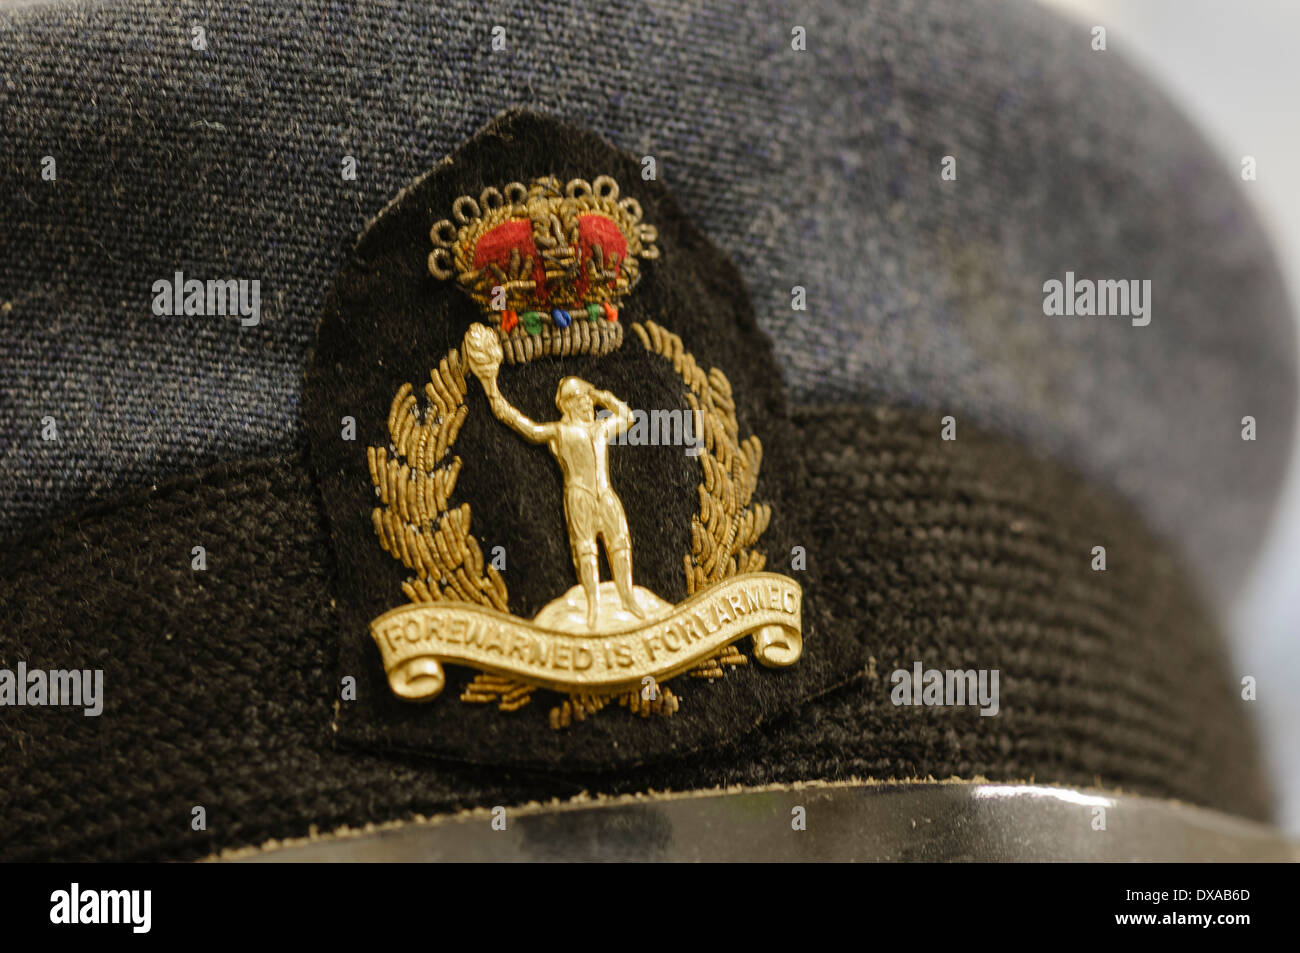 Badge of the Royal Observer Corp with the motto 'Forewarned is Forearmed' Stock Photo